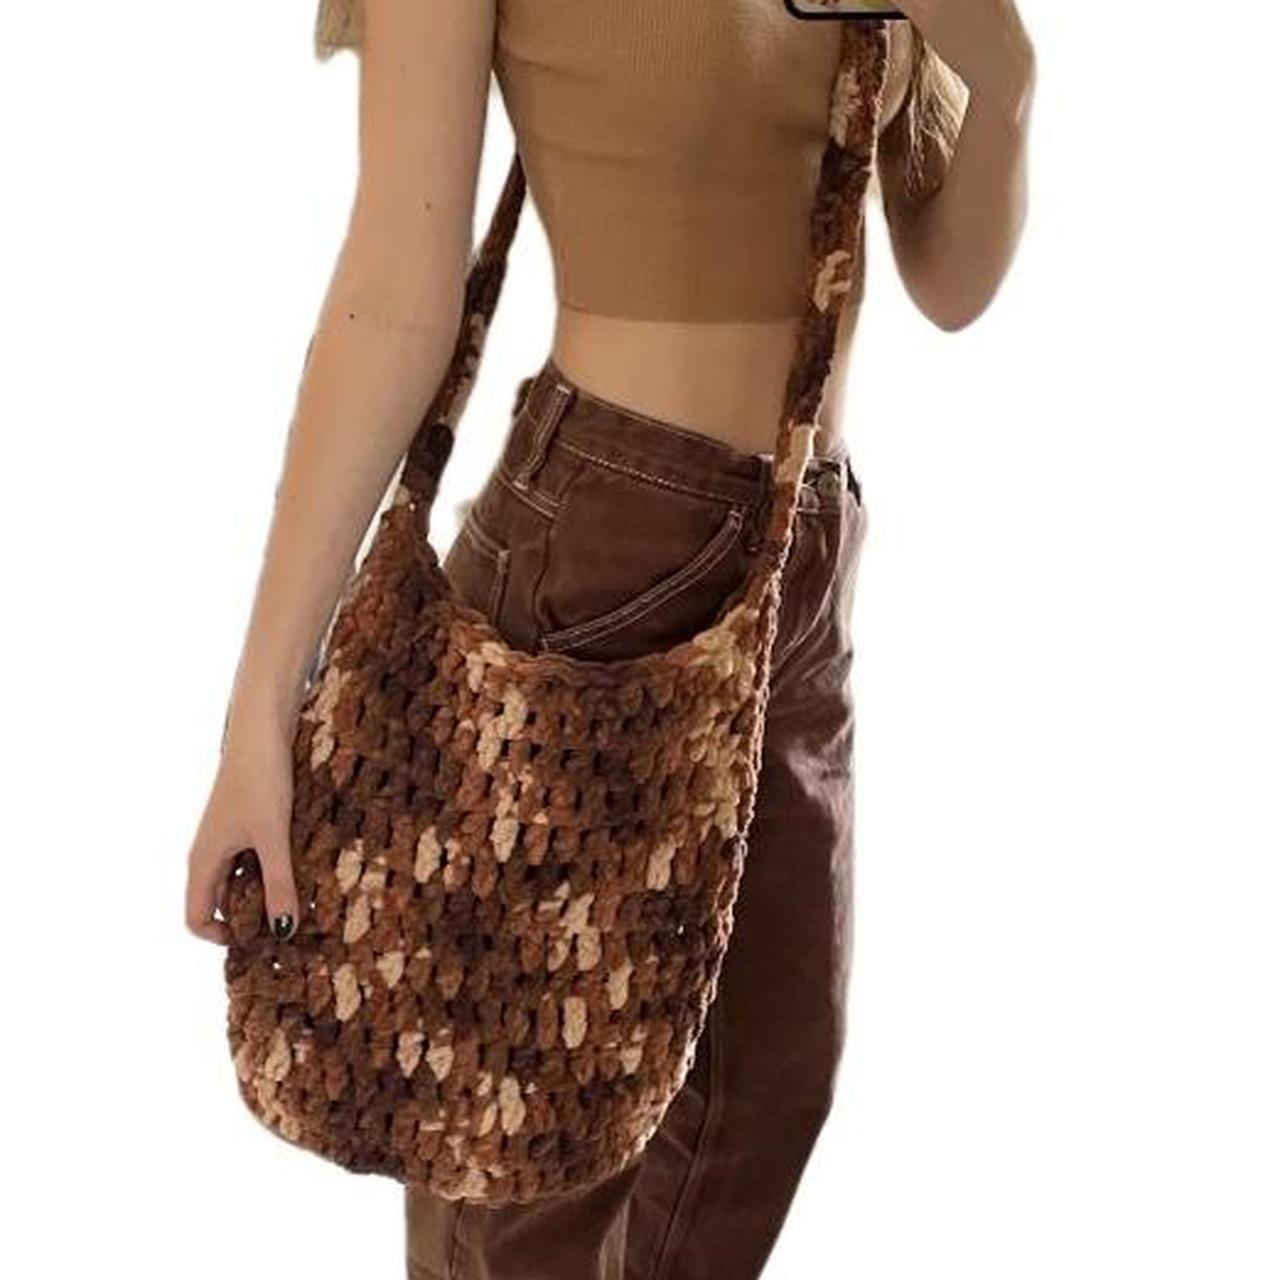 Hands On Design Women's Tan and Brown Bag